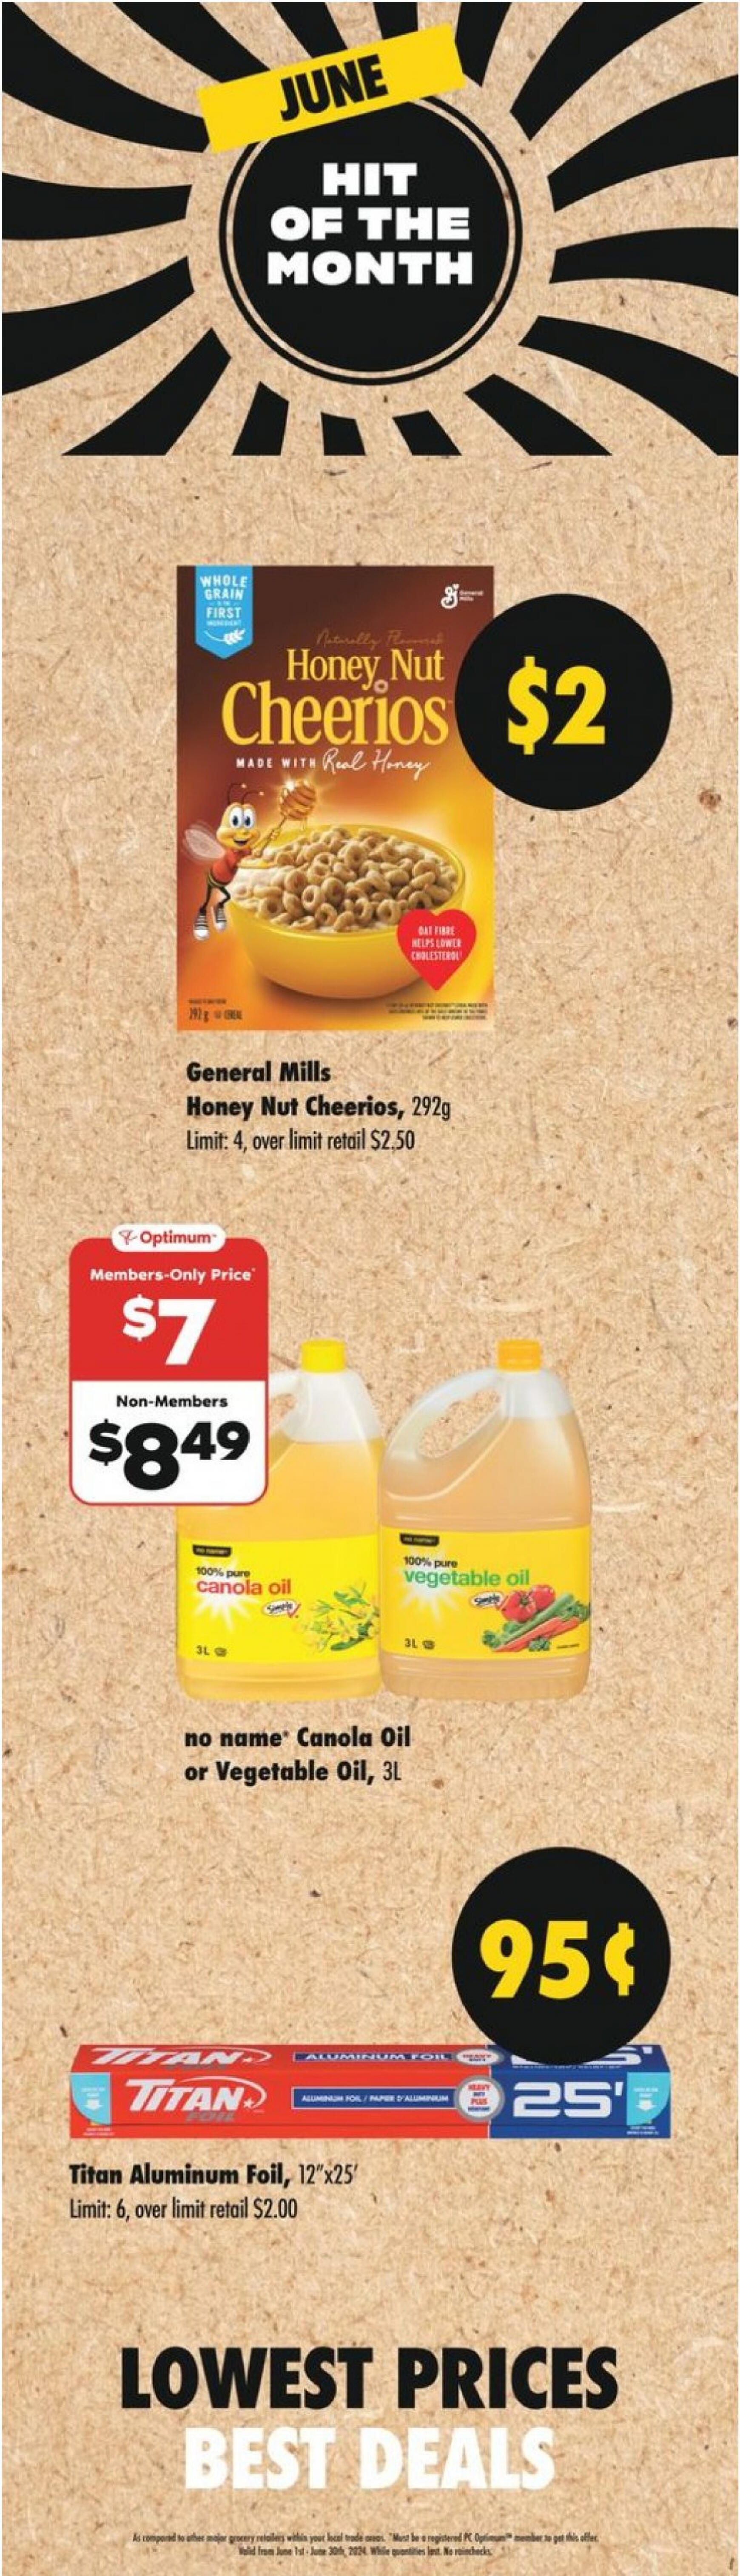 real-canadian-superstore - Real Canadian Superstore flyer current 06.06. - 12.06. - page: 1